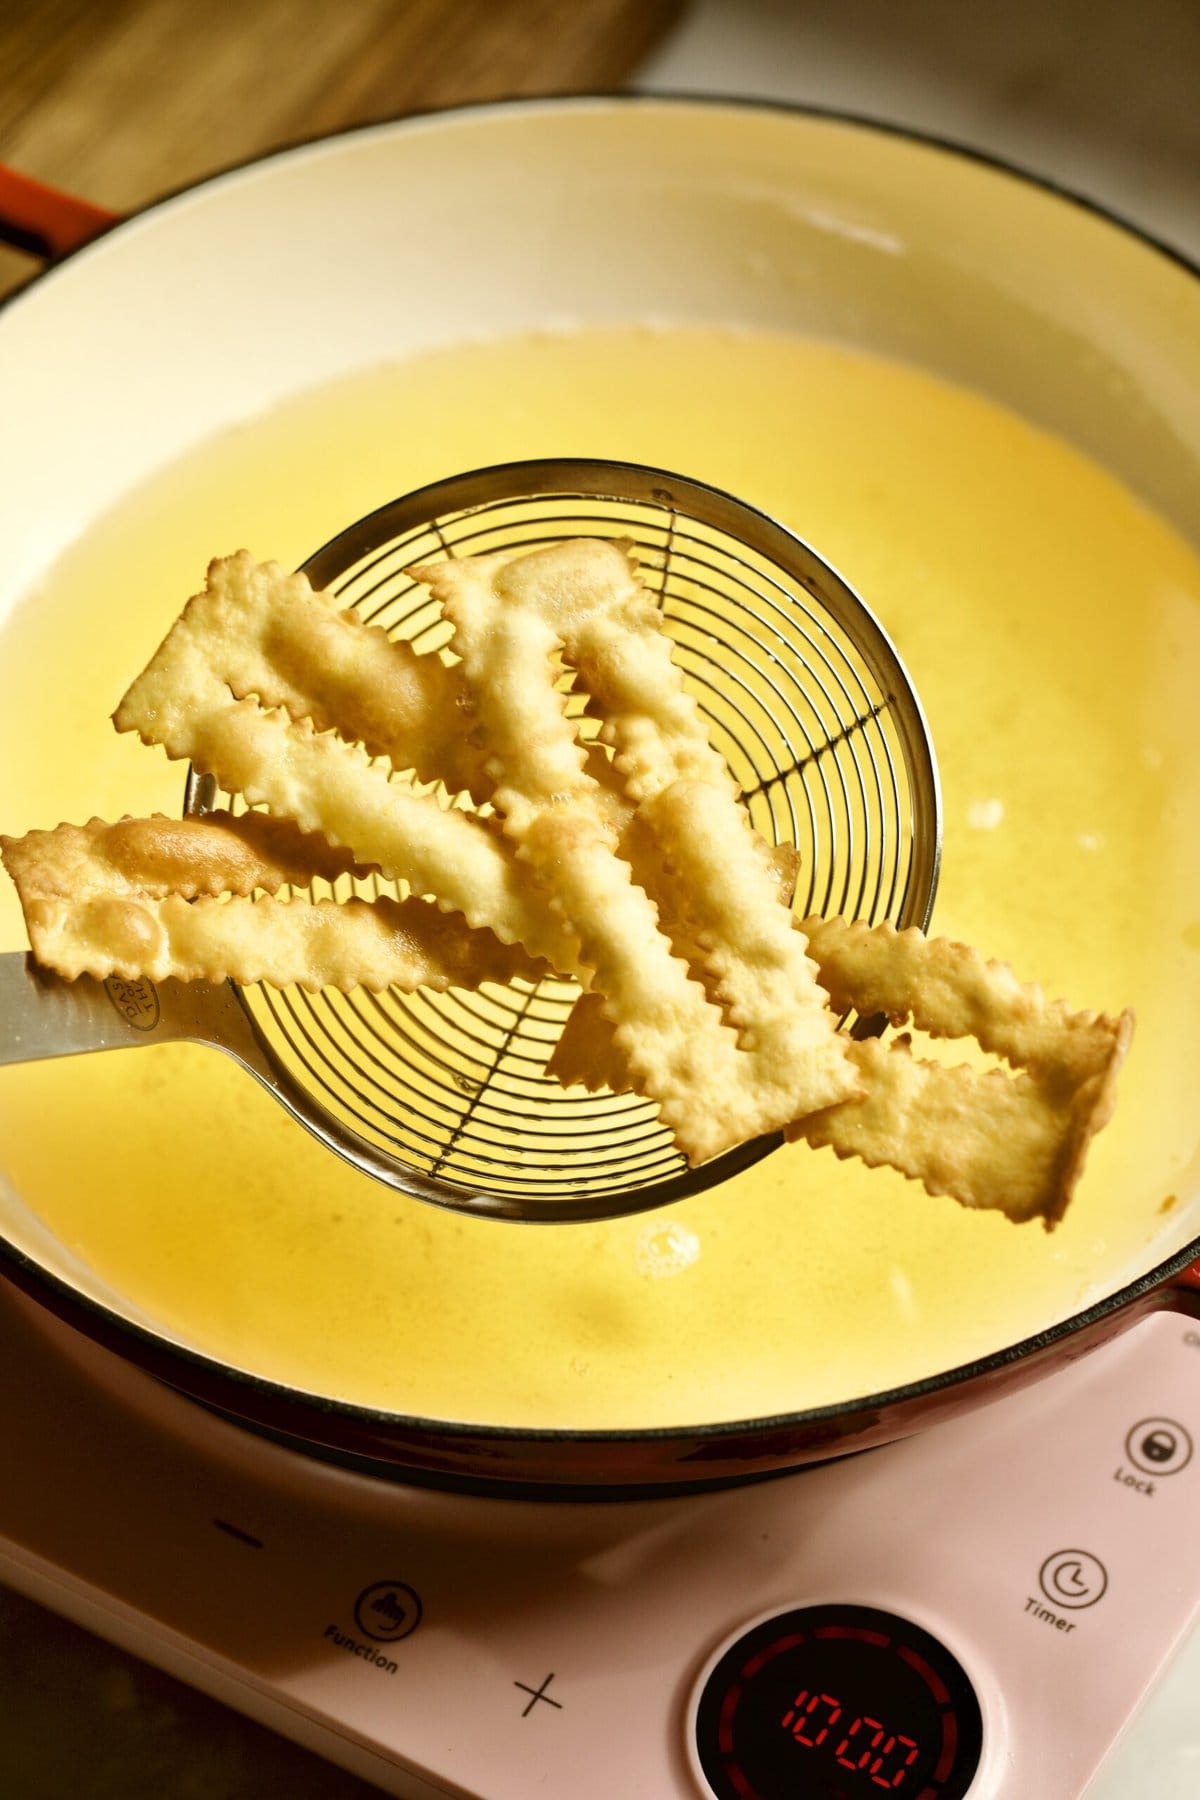 process of making chiacchiere: frying the dough frying in the hot oil taking out with slotted spoon.